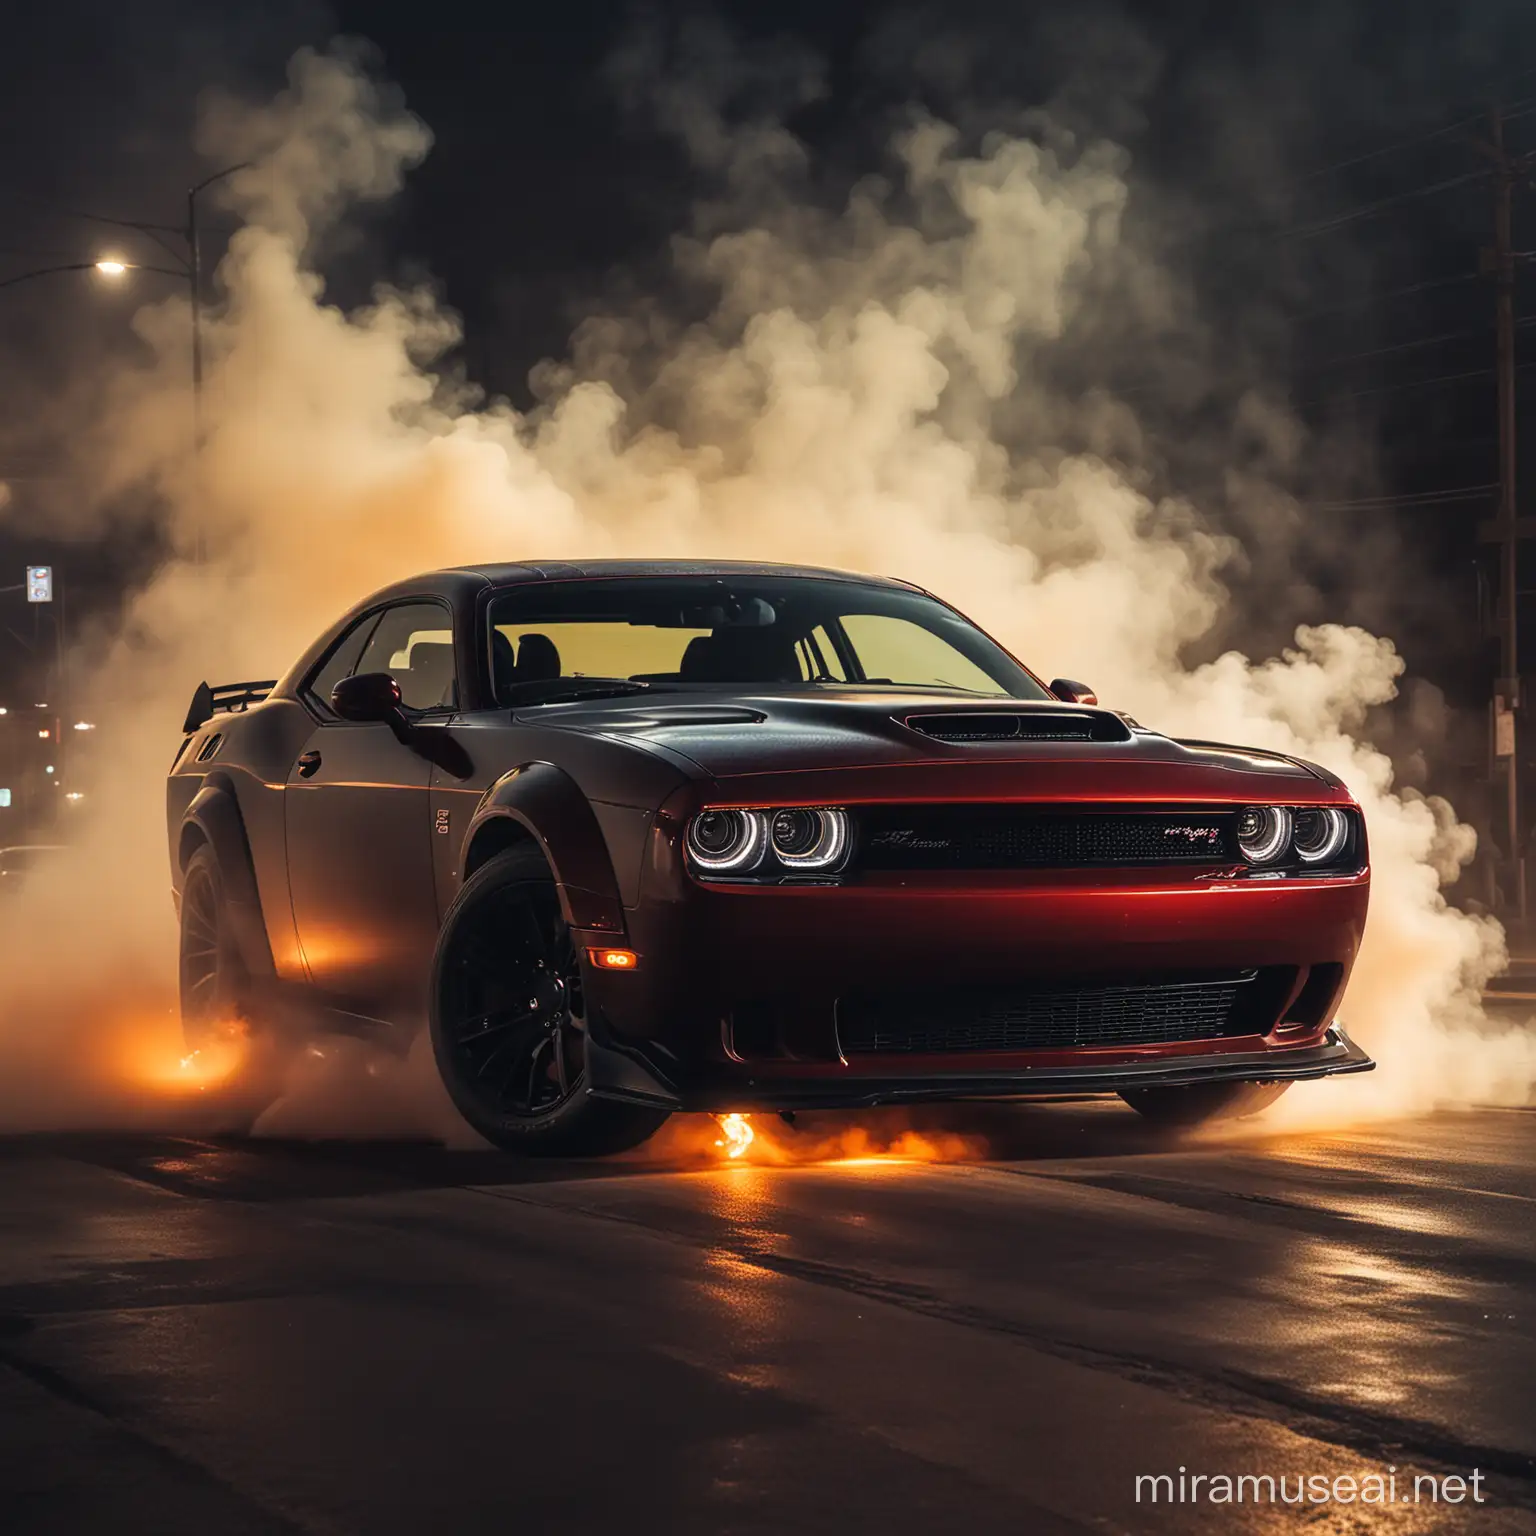 Title: "Obscured Dominance: Dodge Challenger SRT Demon in Drift Smoke"


Title: "Ethereal Obscurity: Dodge Challenger SRT Demon in Drift Smoke with Underglow"

Description: "Imagine a mesmerizing scene where a Dodge Challenger SRT Demon is enveloped in dense drift smoke, its form obscured yet its presence unmistakable. Enhancing this captivating image, vibrant underglow or ground effects lighting illuminates the surrounding haze, casting an otherworldly glow upon the scene. The lights should dance along the edges of the car's chassis, adding an ethereal and futuristic element to the composition. Amidst the swirling smoke and pulsating lights, the SRT Demon's headlights bleed through, casting an eerie yet captivating illumination. The overall effect should be one of enigmatic allure, as if the car exists in a realm between reality and fantasy, its power and mystique transcending the confines of the ordinary. Let the artwork evoke a sense of wonder and fascination, drawing the viewer into a world where the boundaries of imagination and reality crisp."